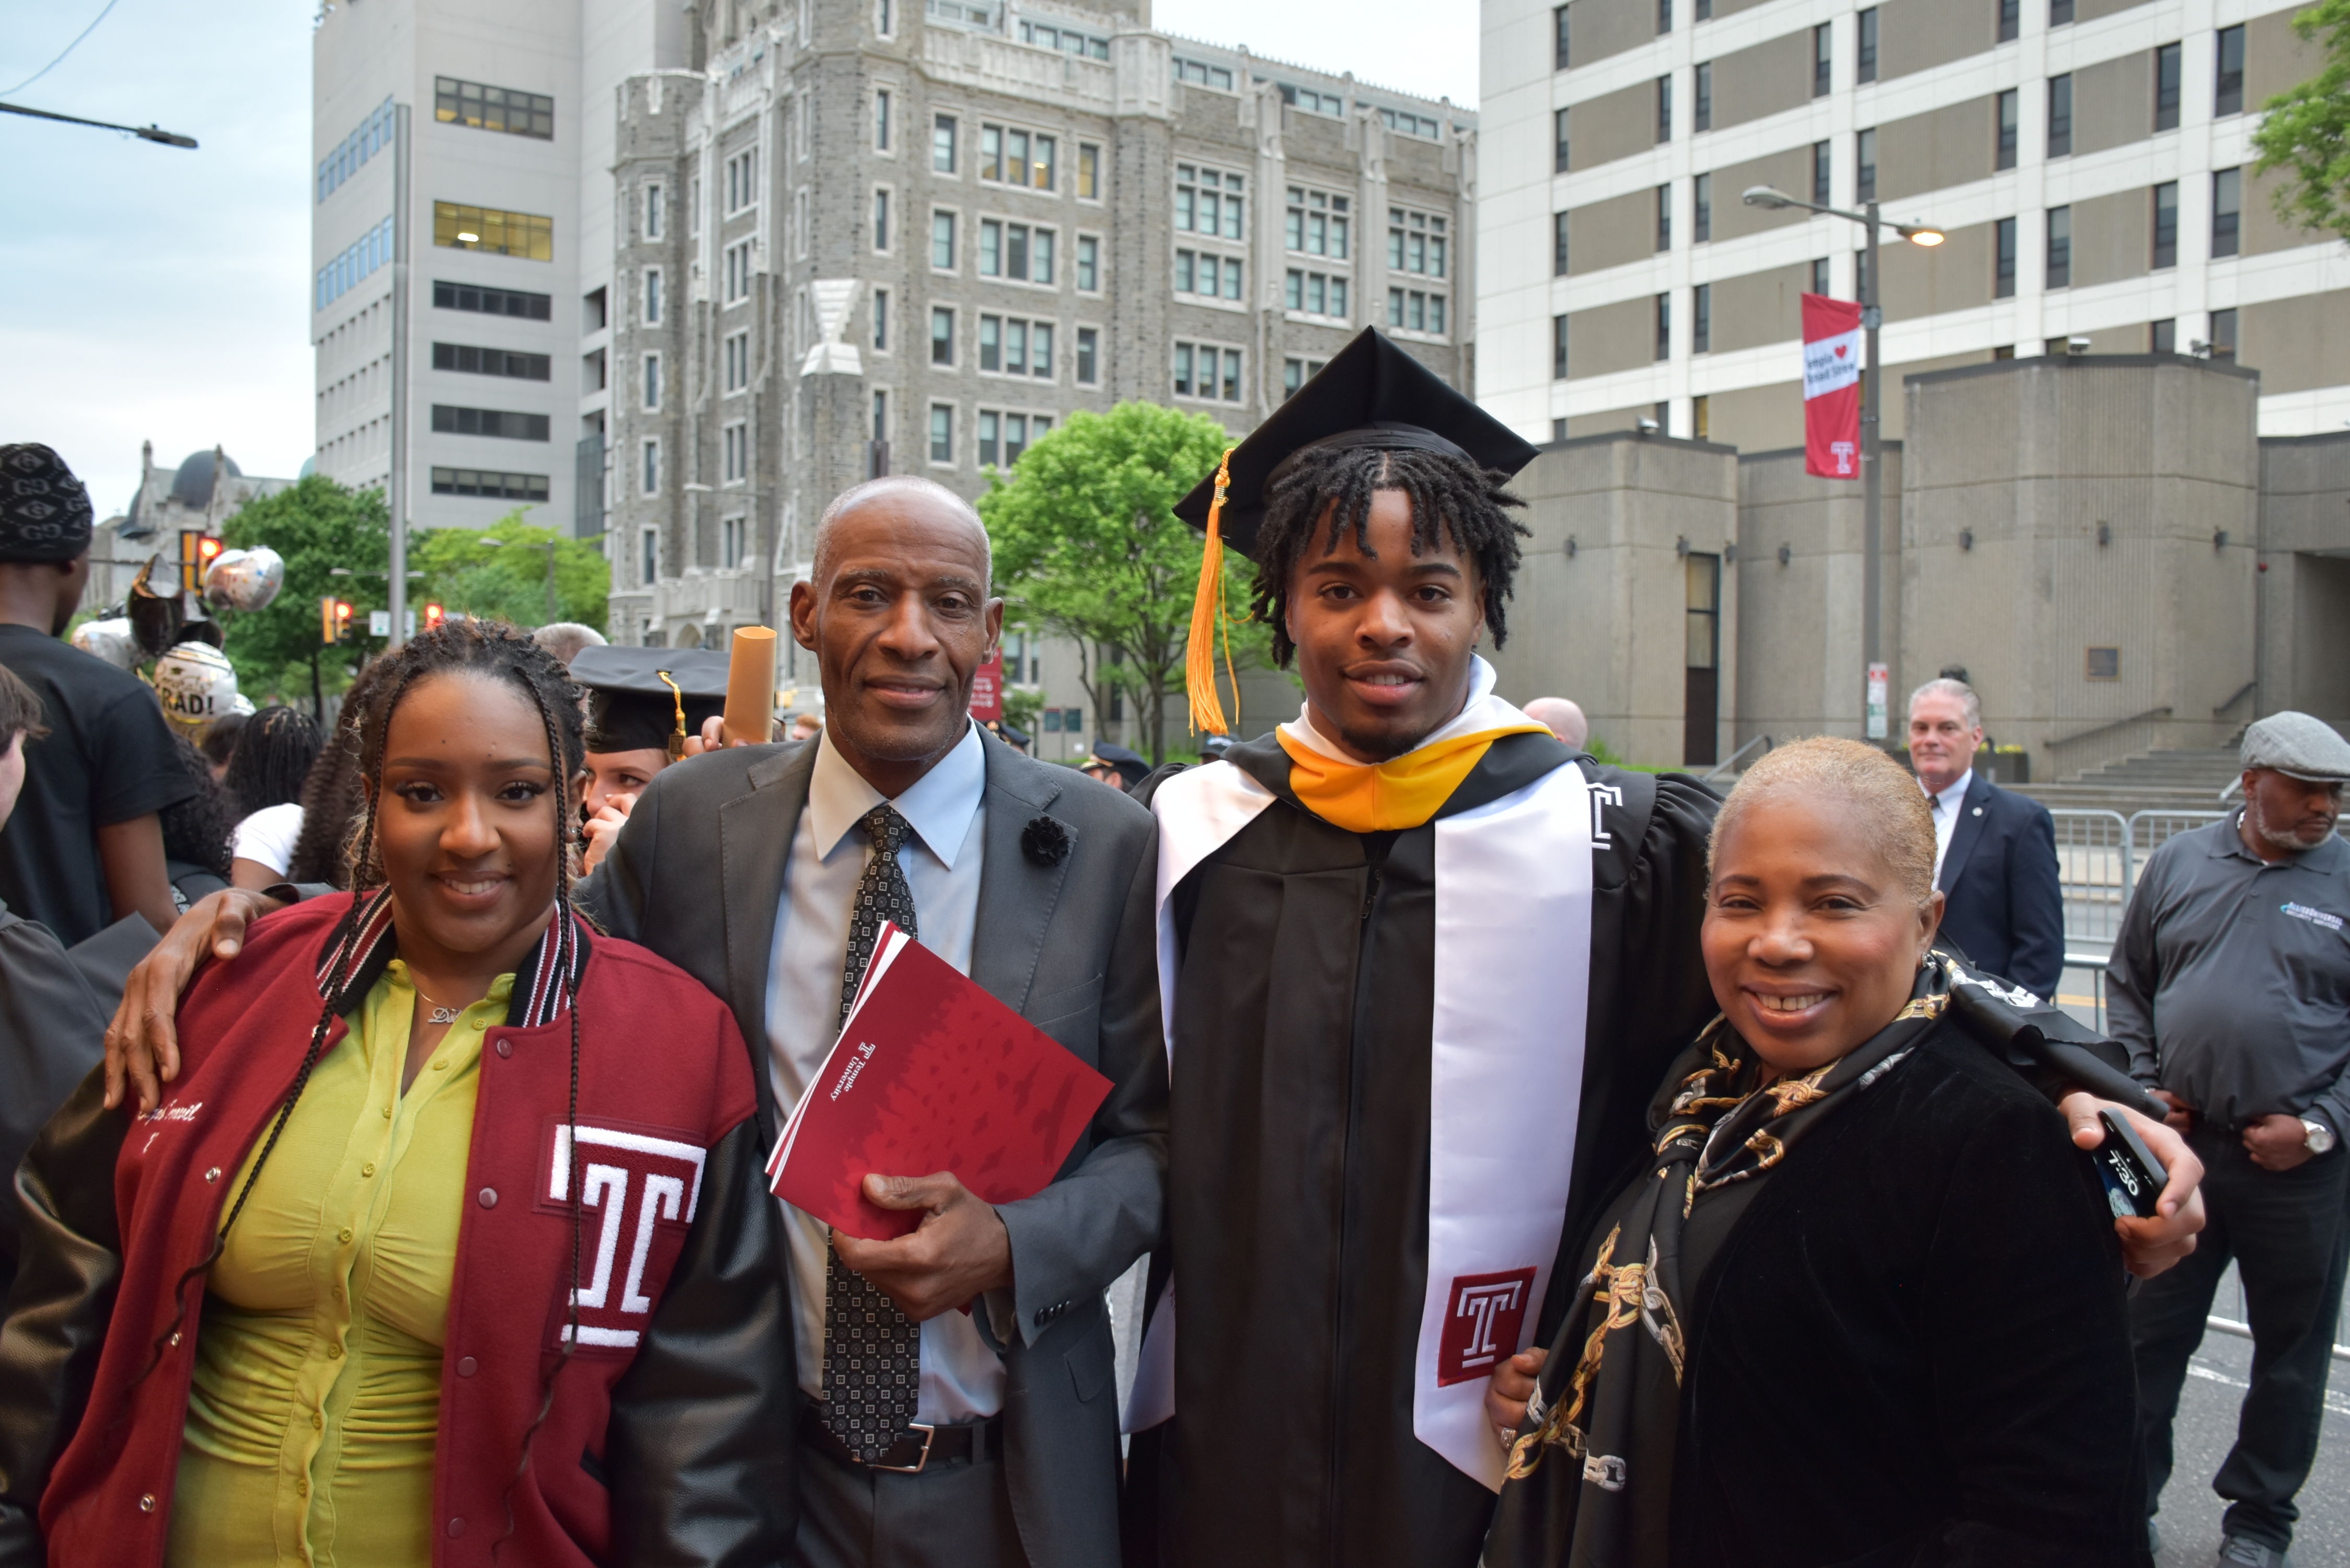 Graduate celebrates with family outside The Liacouras Center after graduation